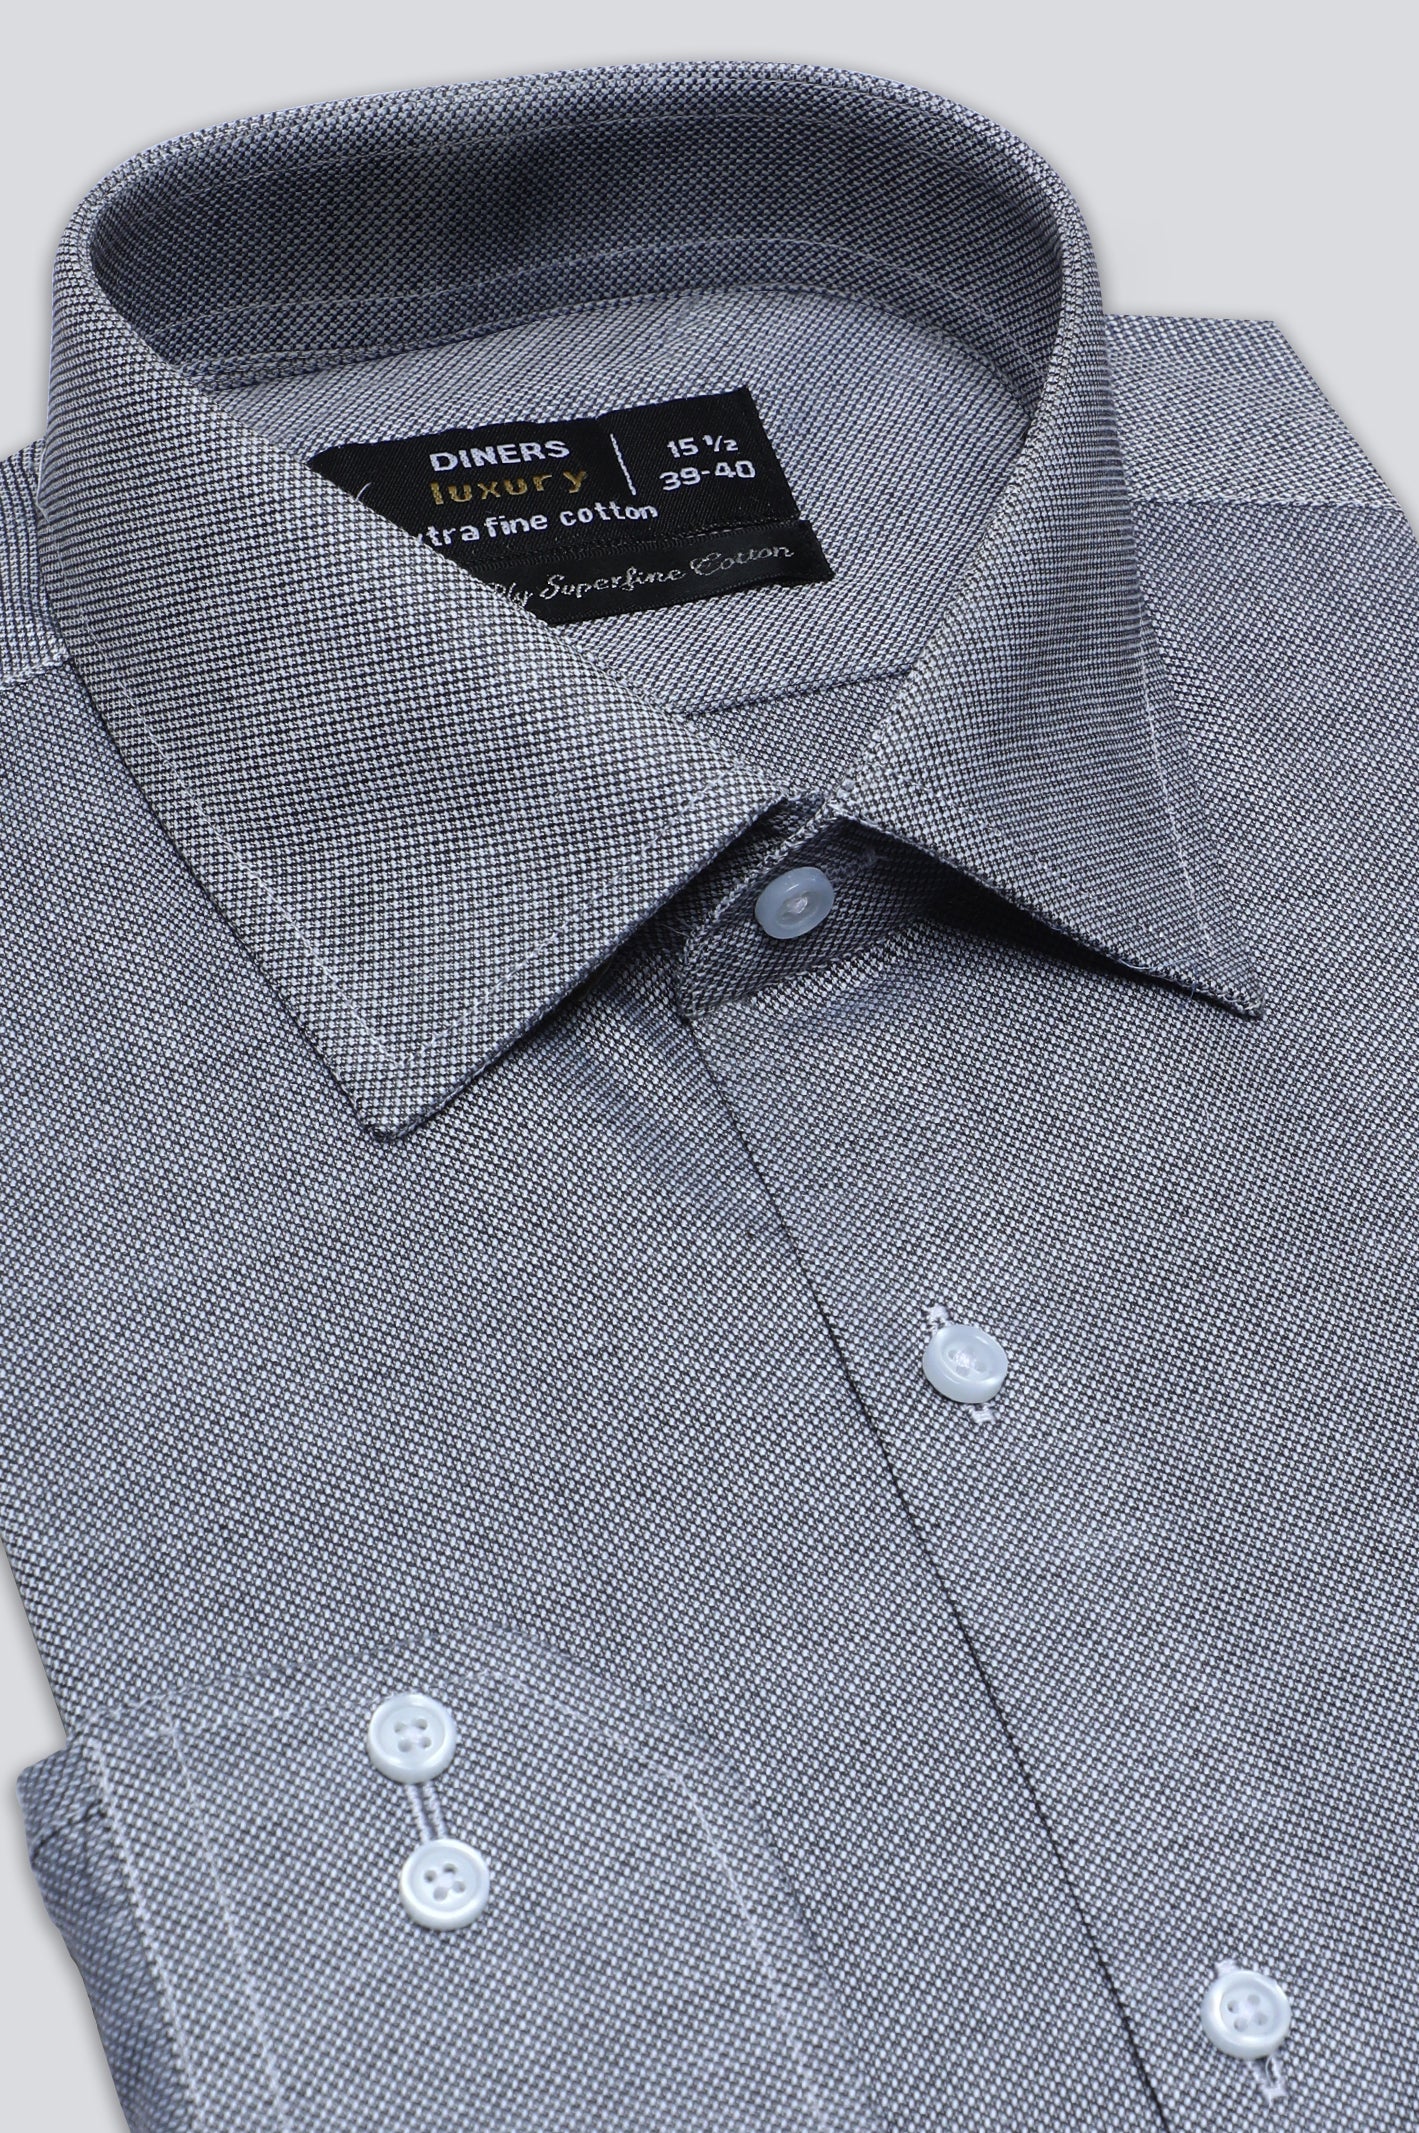 Grey Texture Formal Shirt For Men - Diners